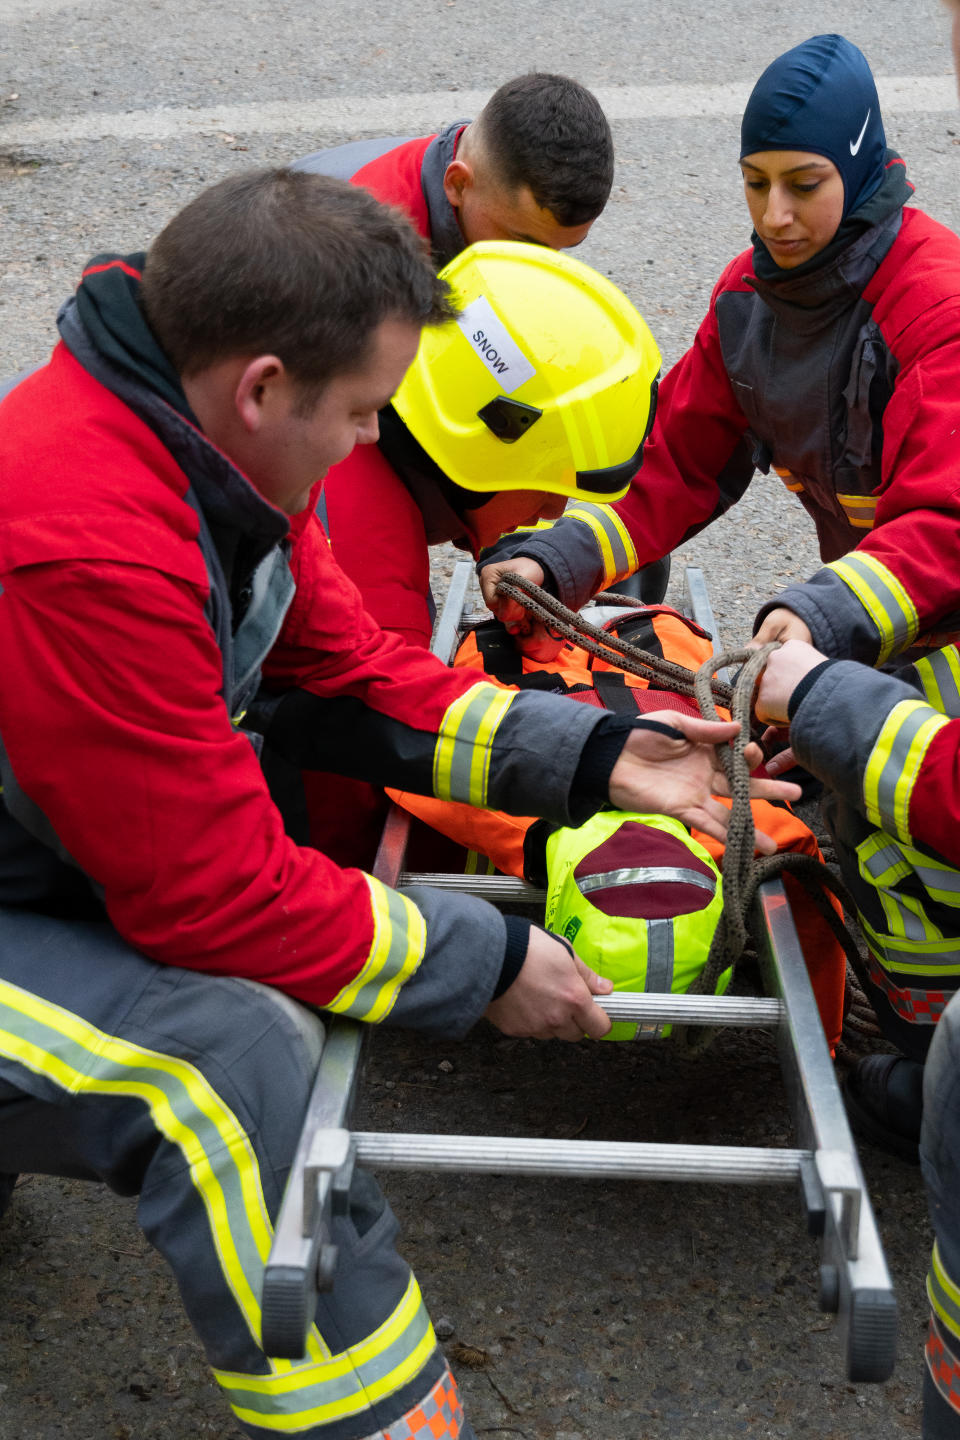 Uroosa Arshid trains with her colleagues. (Nottinghamshire Fire and Rescue Service)